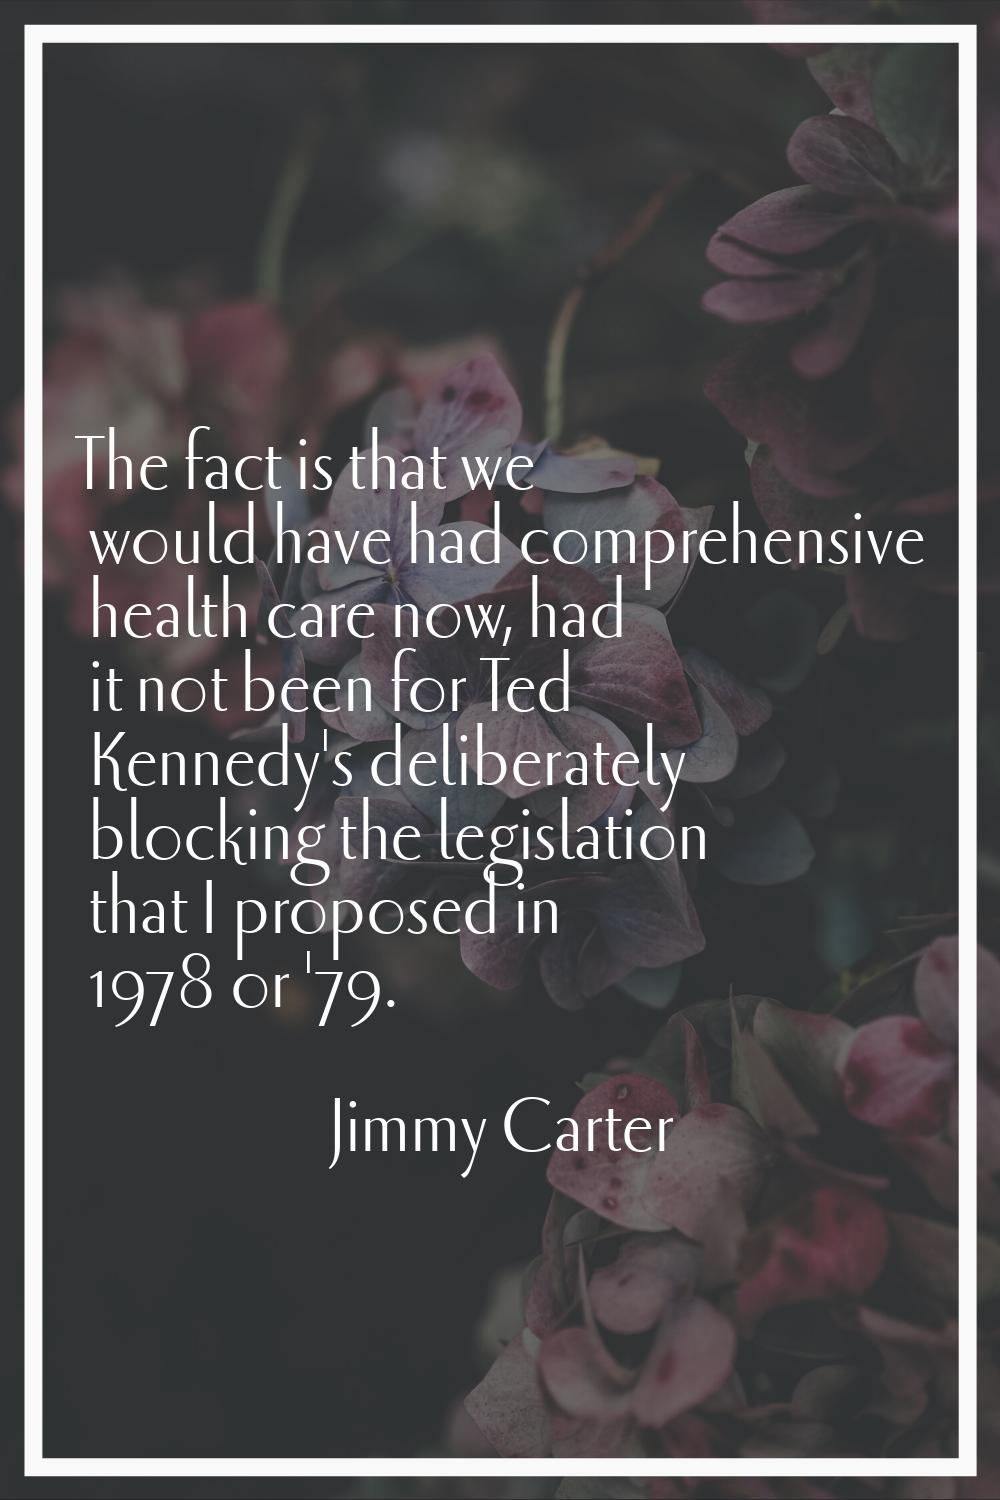 The fact is that we would have had comprehensive health care now, had it not been for Ted Kennedy's